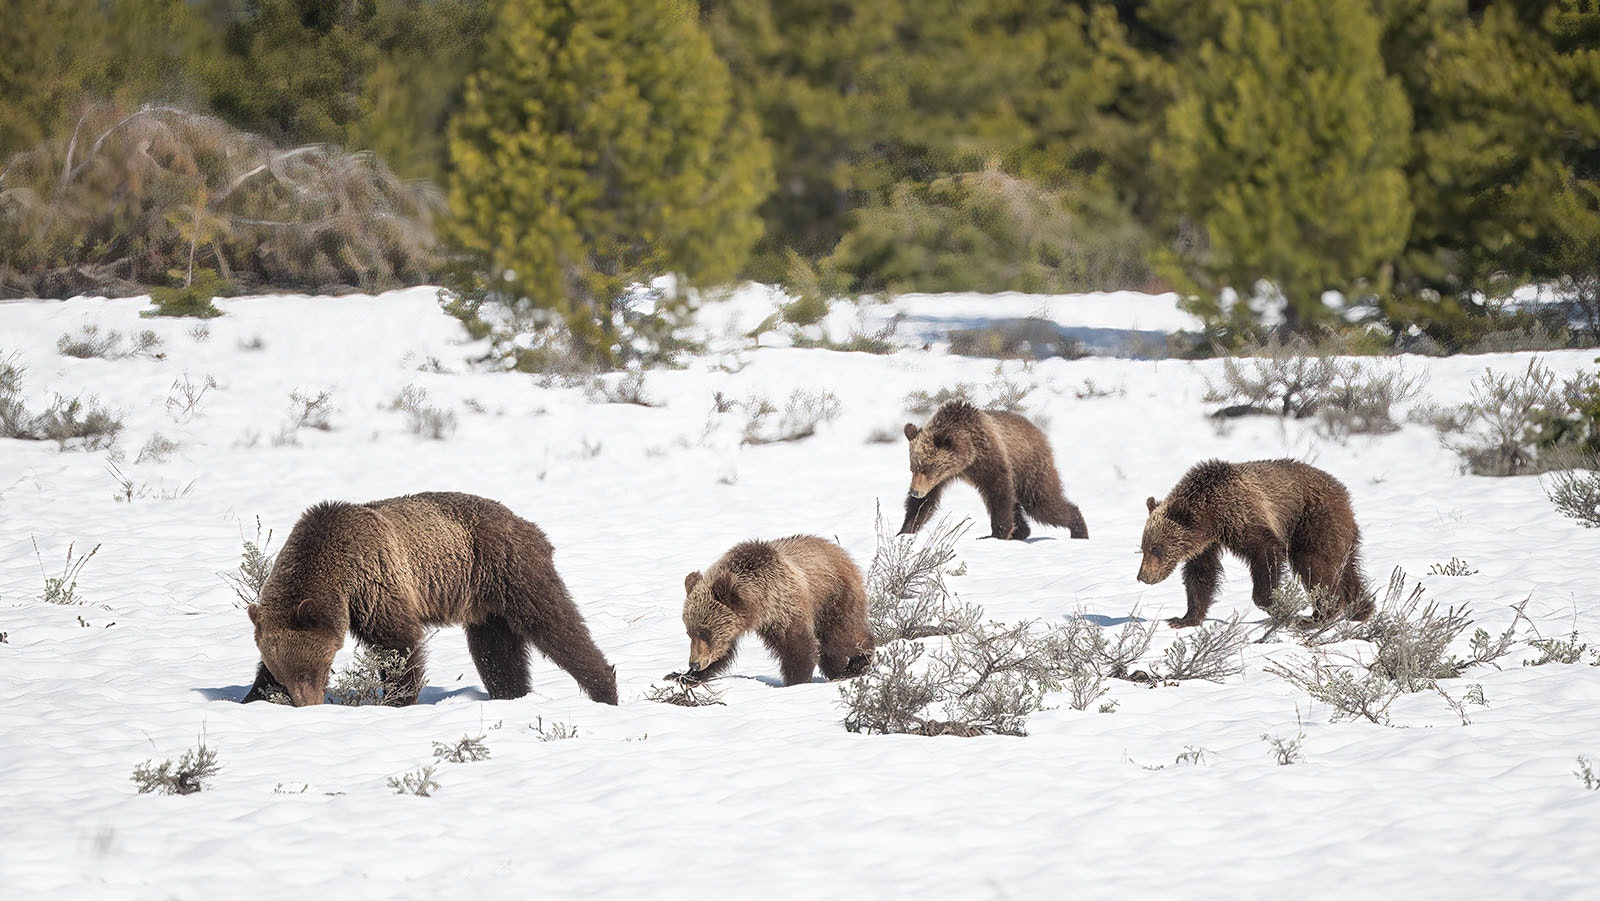 A mother grizzly and her cubs move through the Greater Yellowstone Ecosystem.